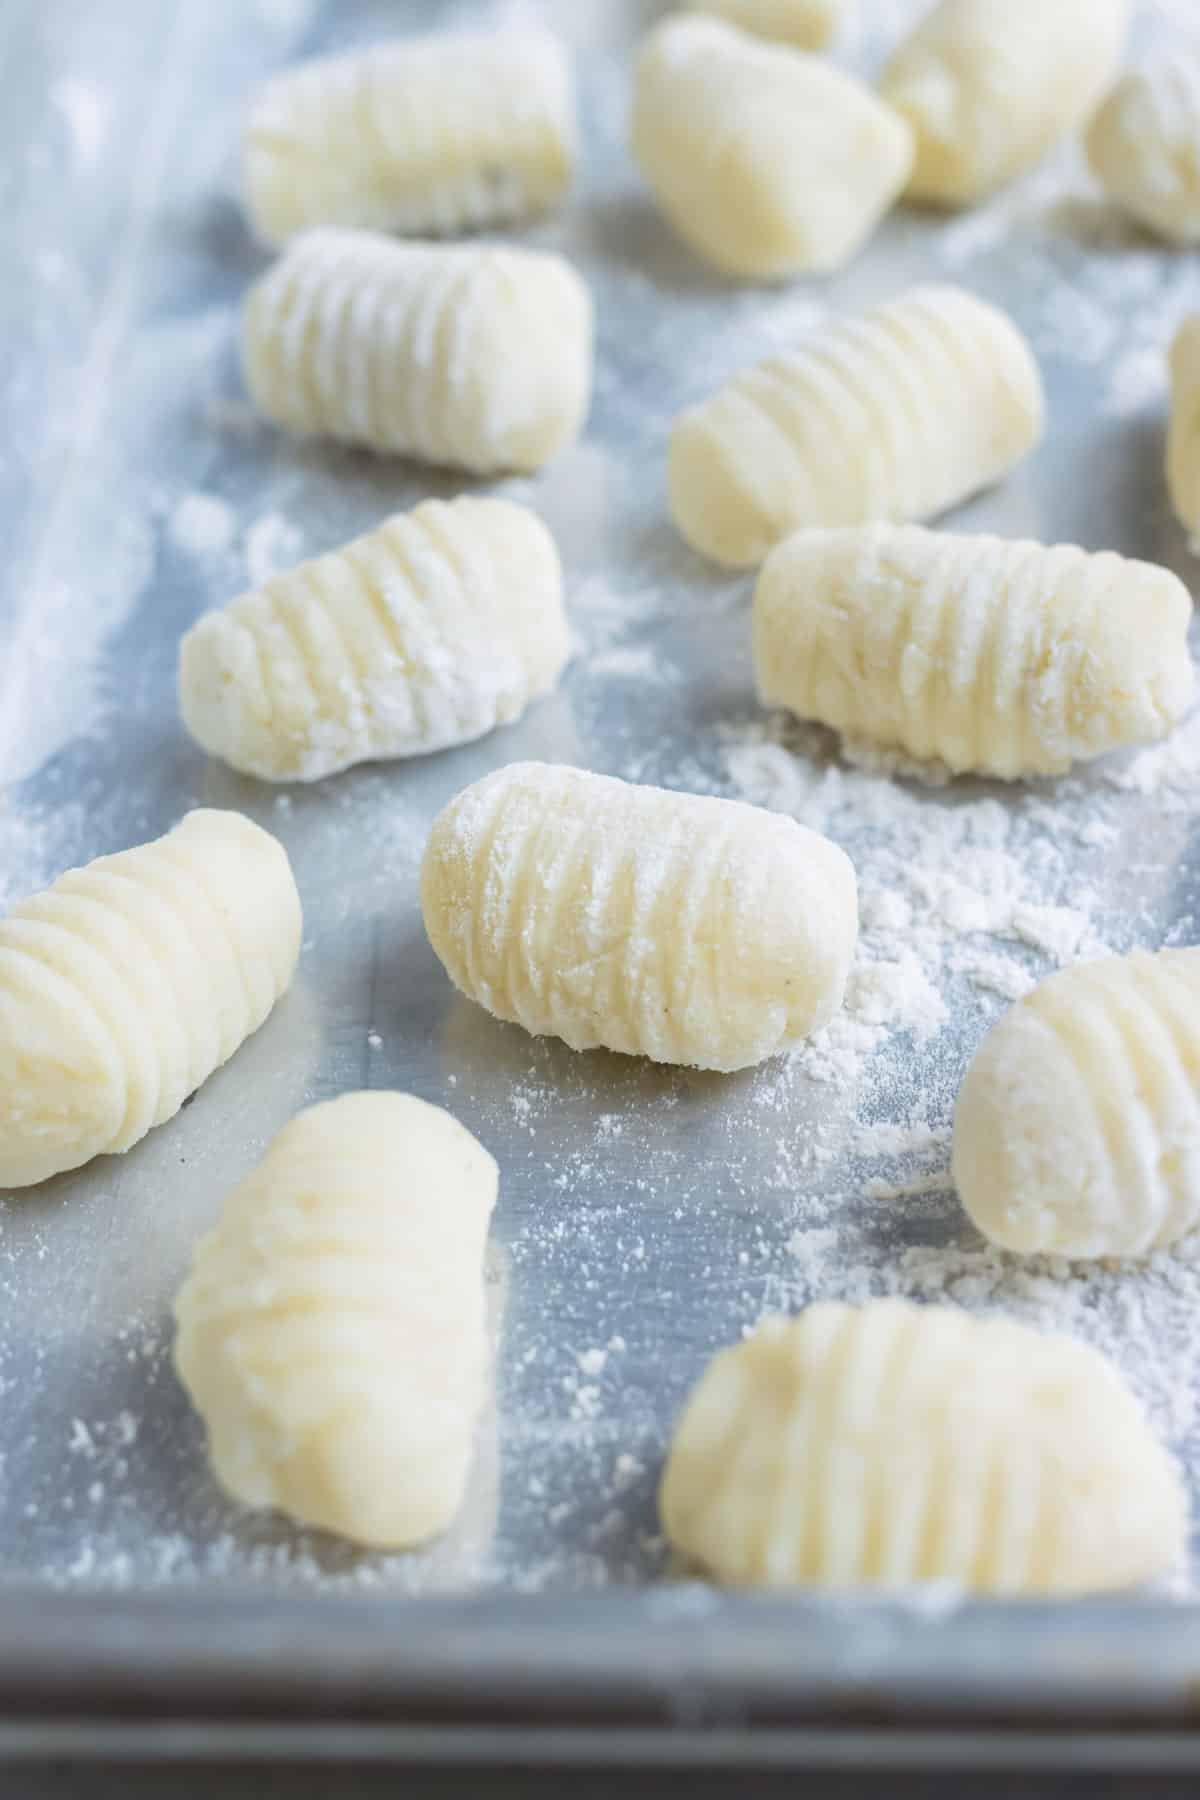 Gluten-free gnocchi is set on a floured surface until cooking.